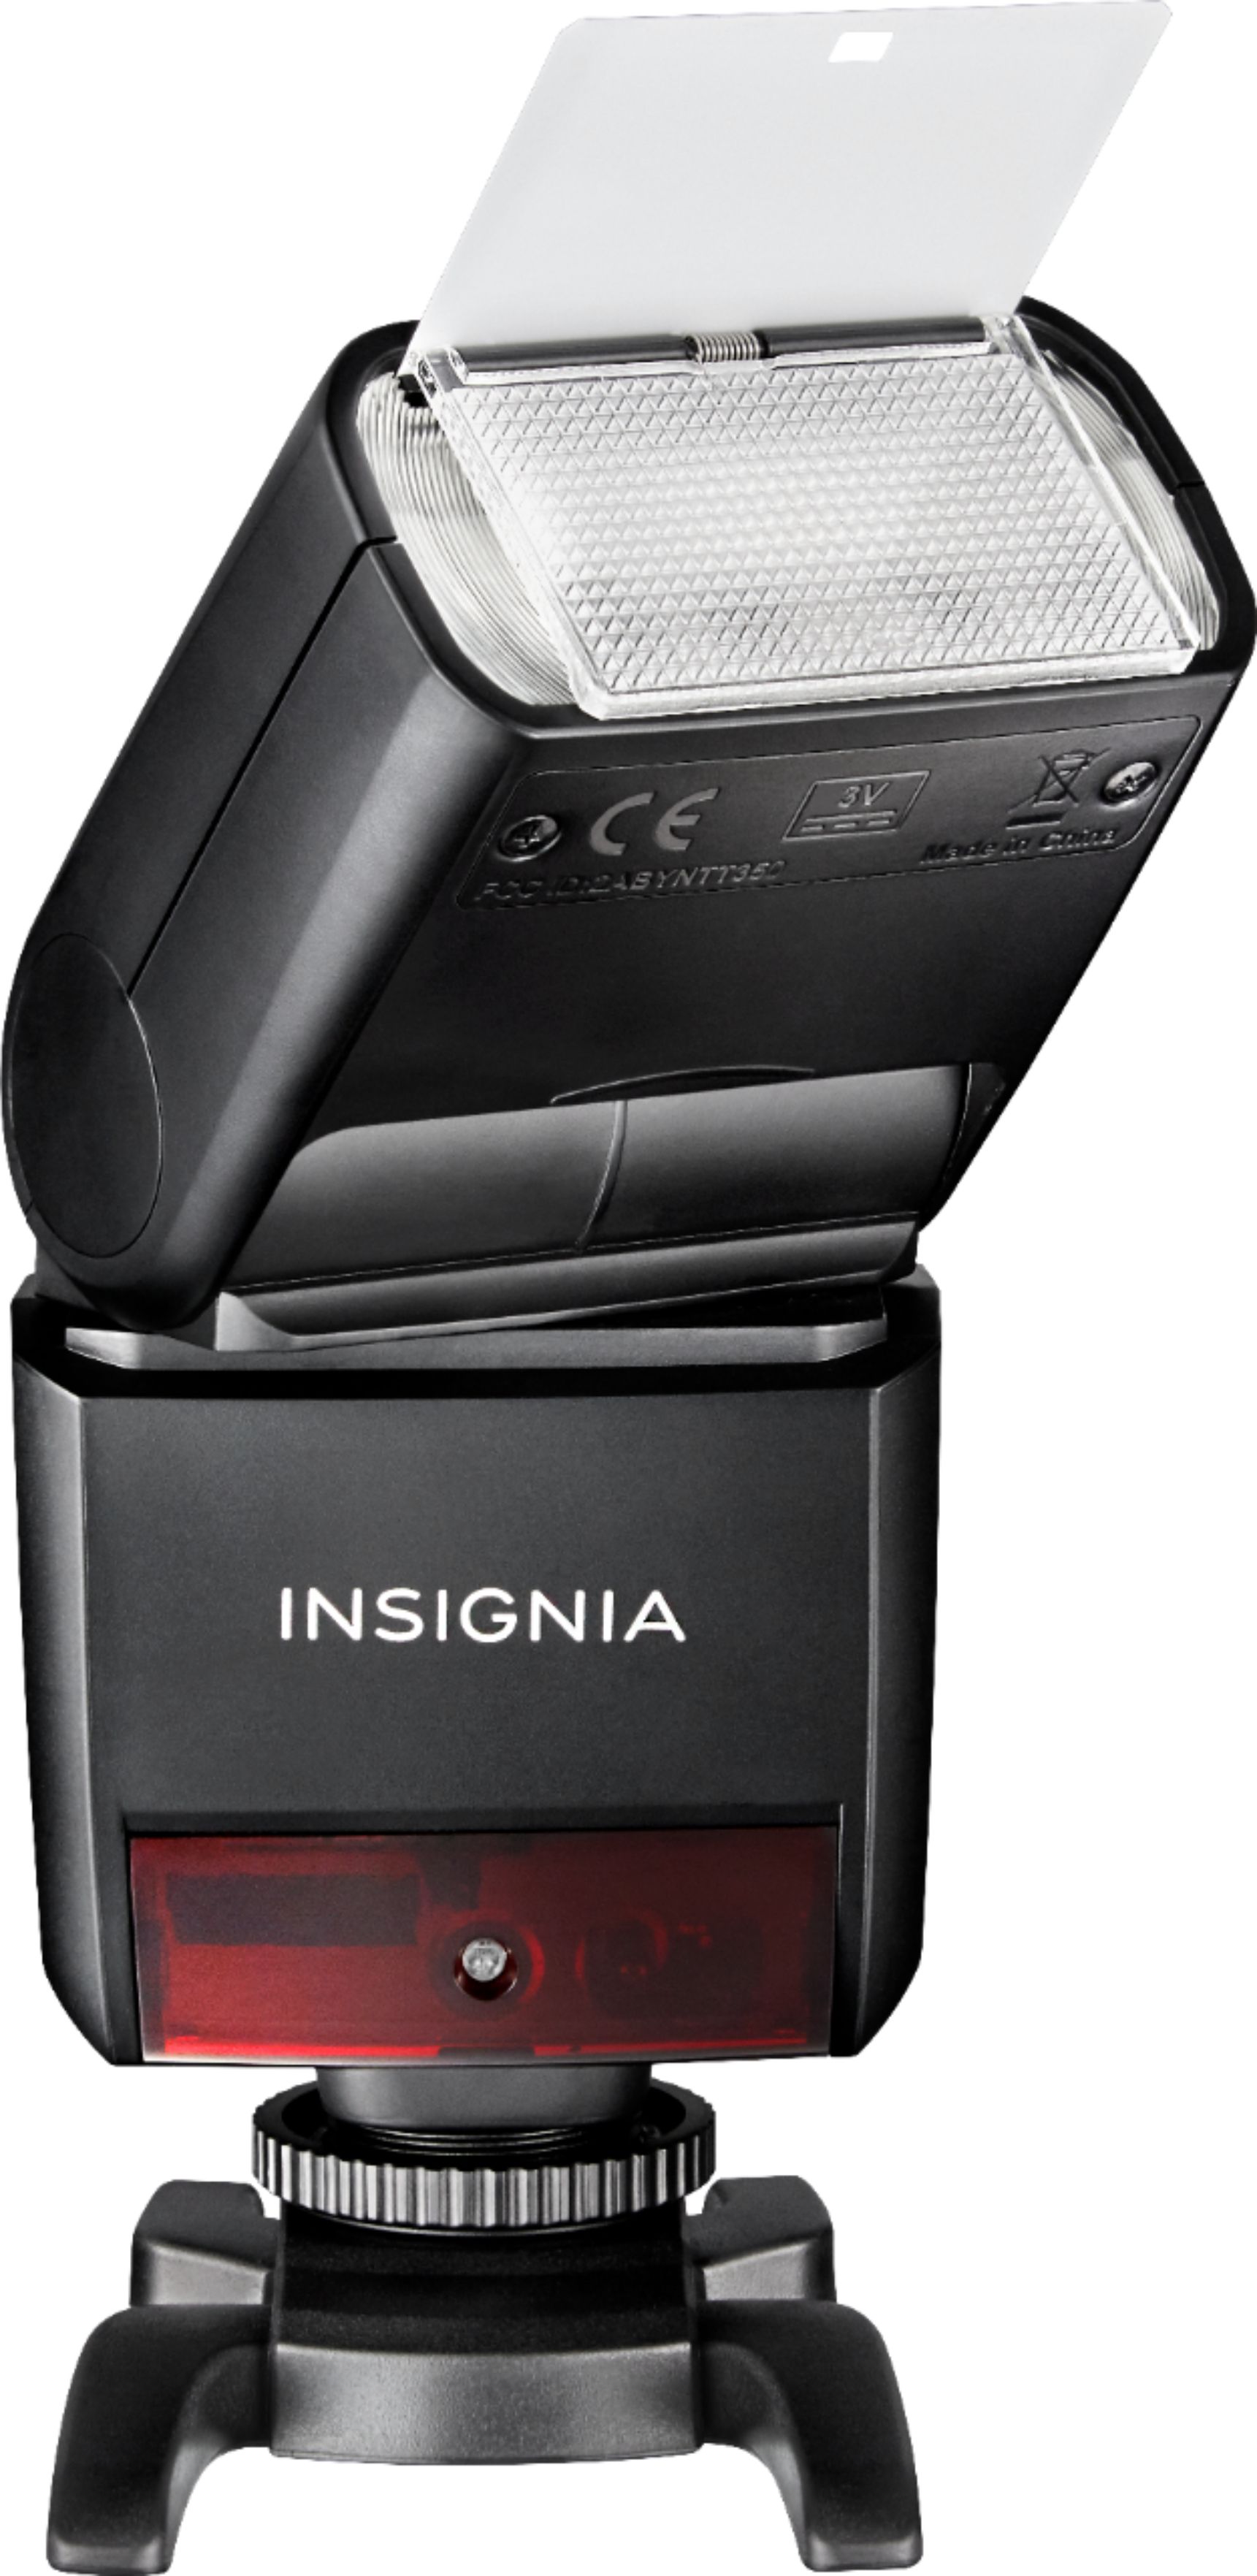 Insignia Compact TTL Flash 36 Guide Number 24-105mm NS-DCF200S for Sony Cameras 